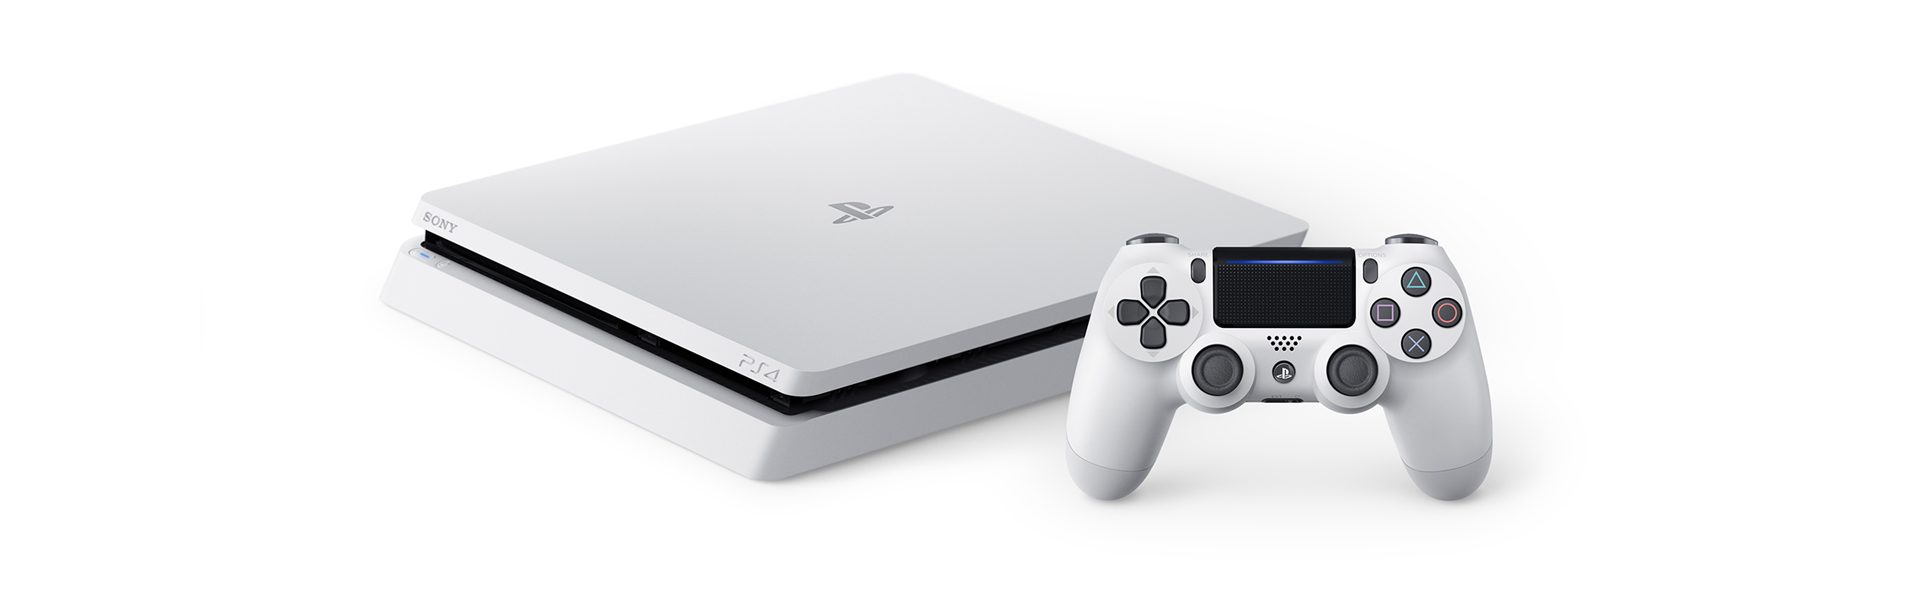 playstation 4 white edition